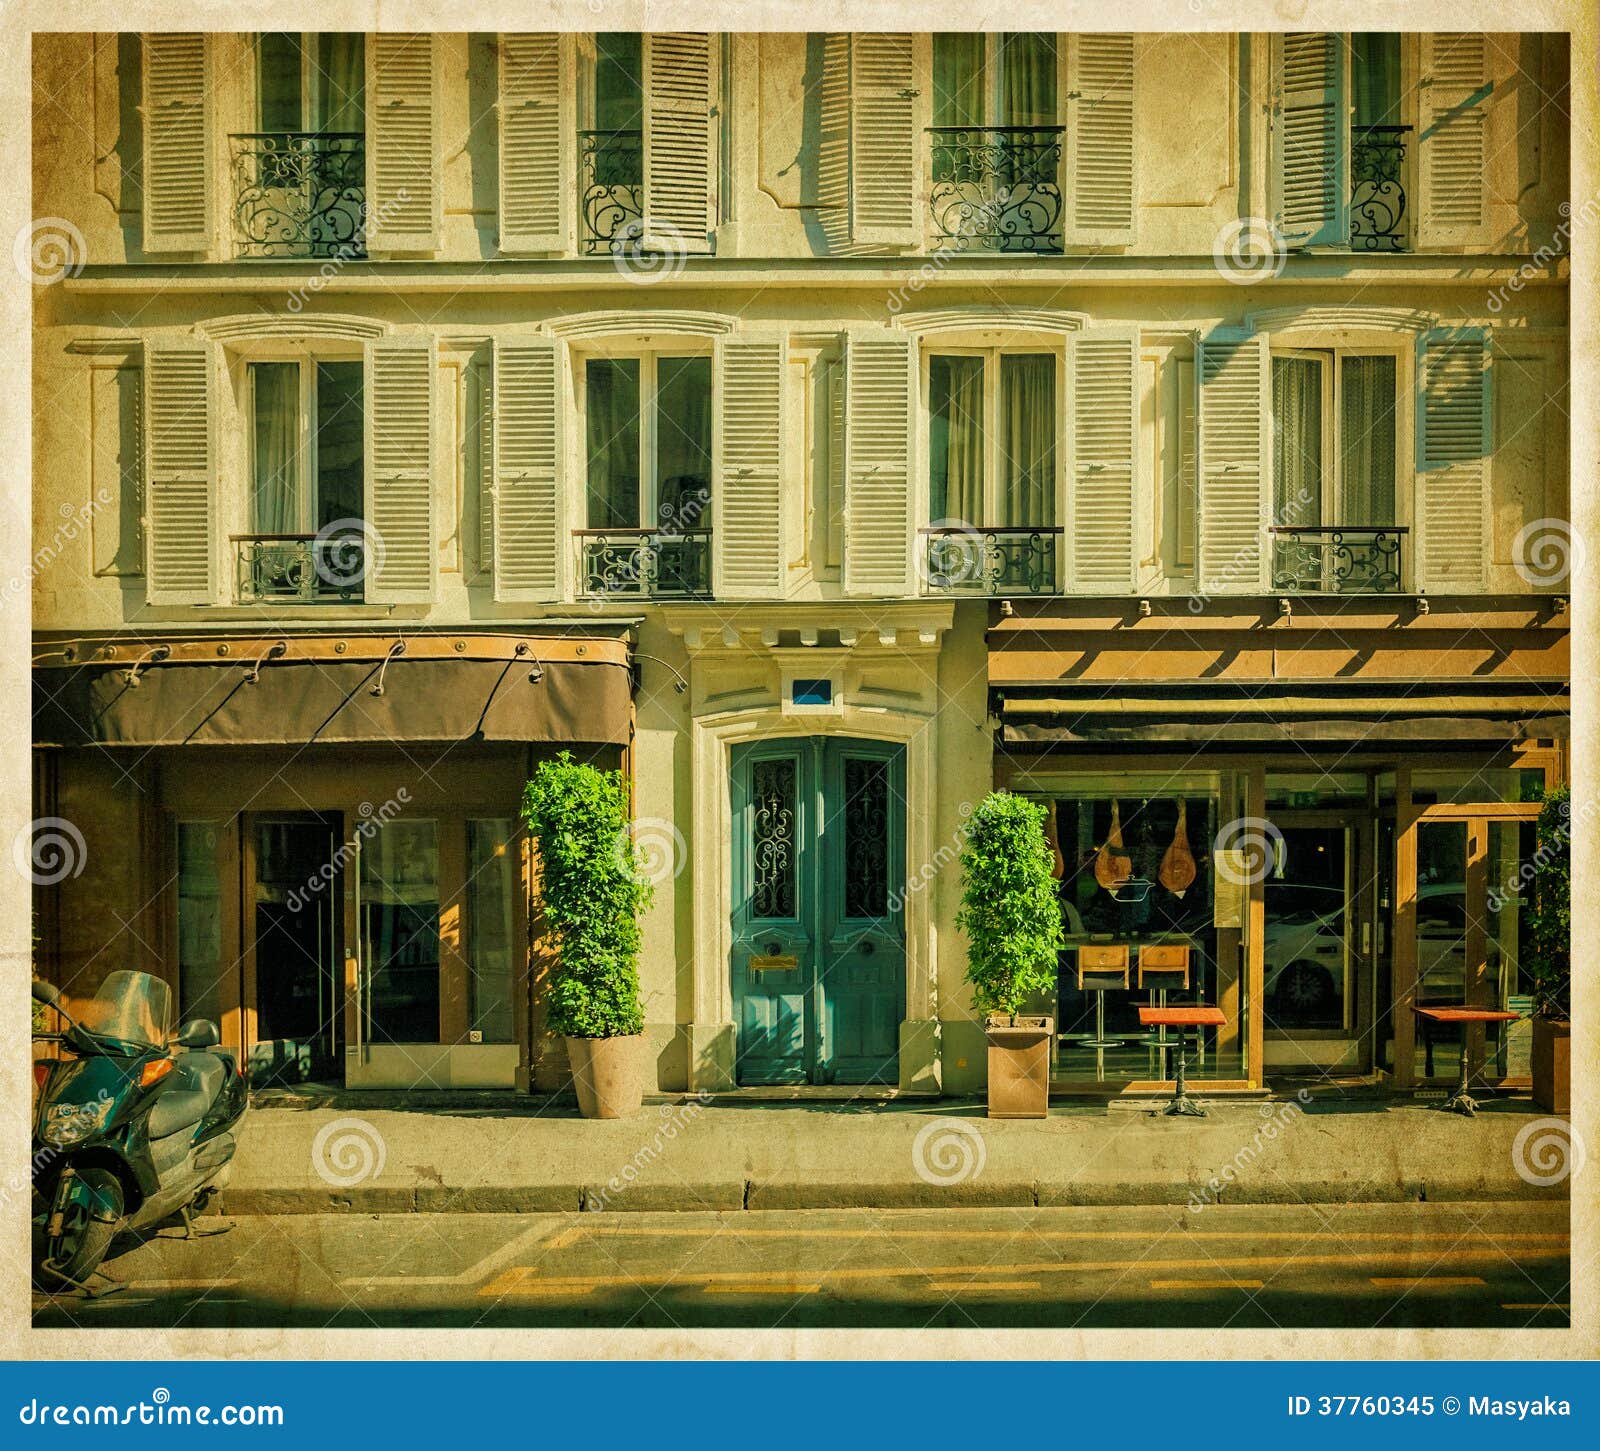 traditional parisian house with cafe. old photo